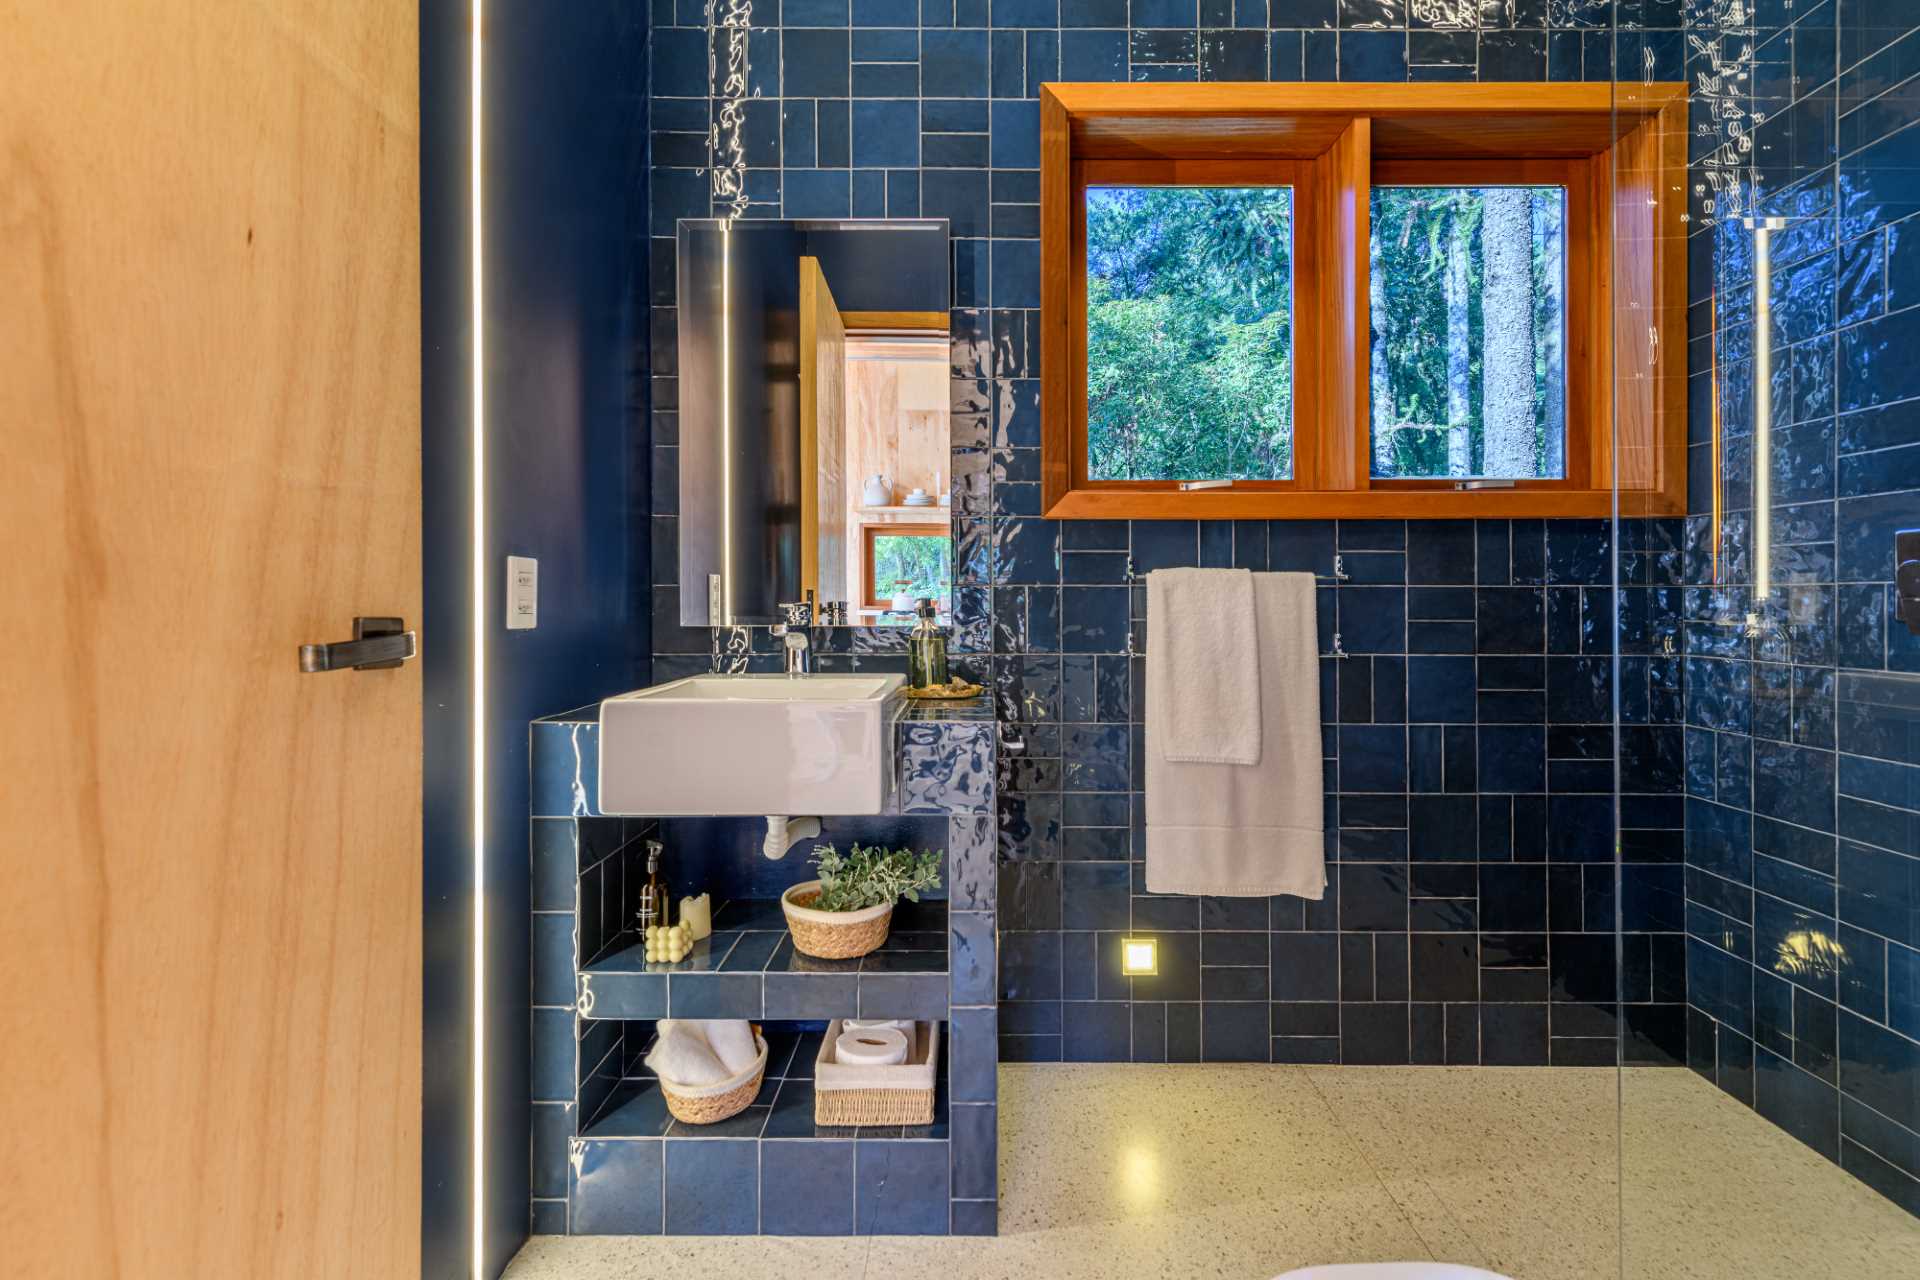 A modern bathroom in a tree house has walls and a vanity covered in blue tiles.